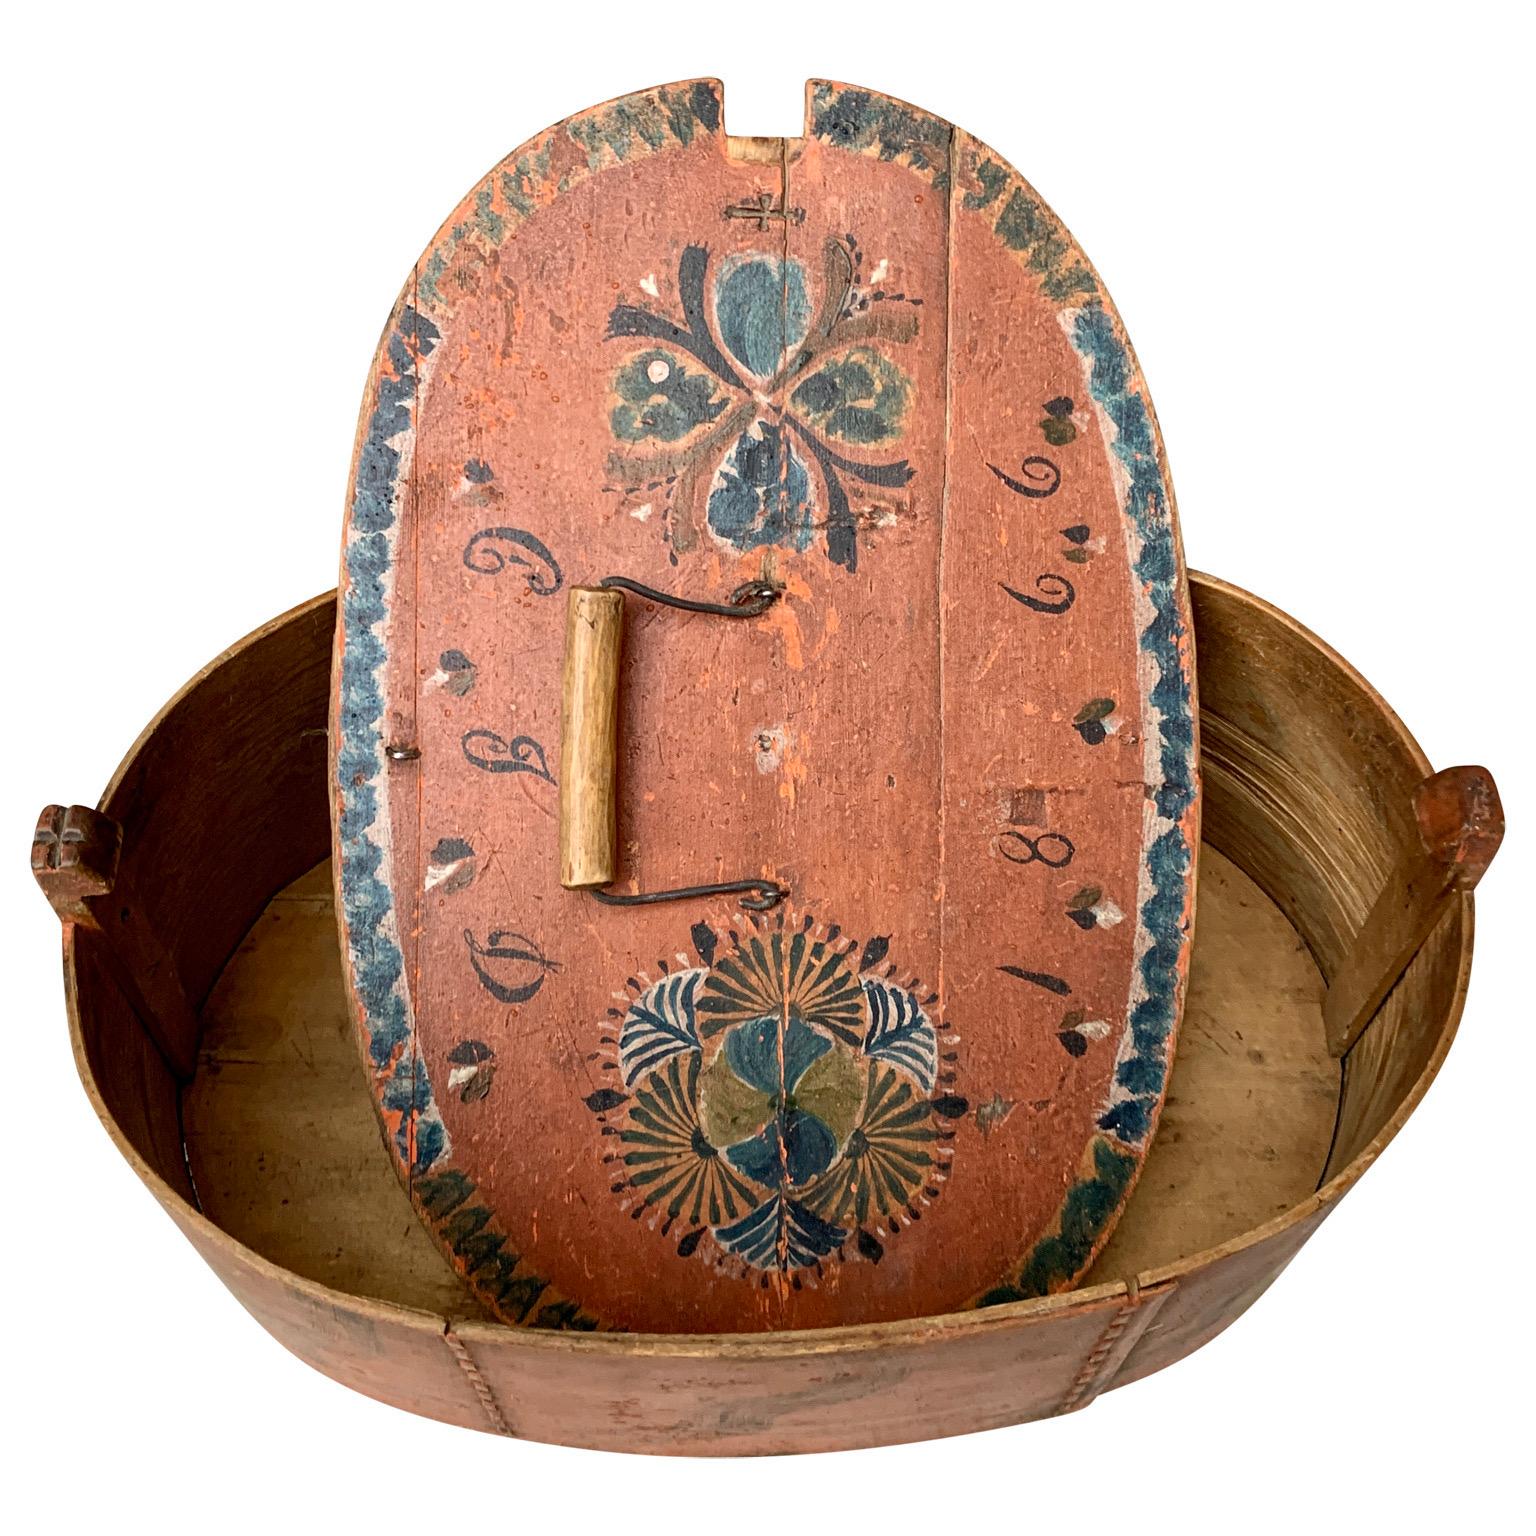 A  19th Century original painted decorative box from the region of Jämtland in Sweden, close to the mountain that separates the two Scandinavian countries Norway and Sweden. These types of boxes are usually used to bring food out in the fields or